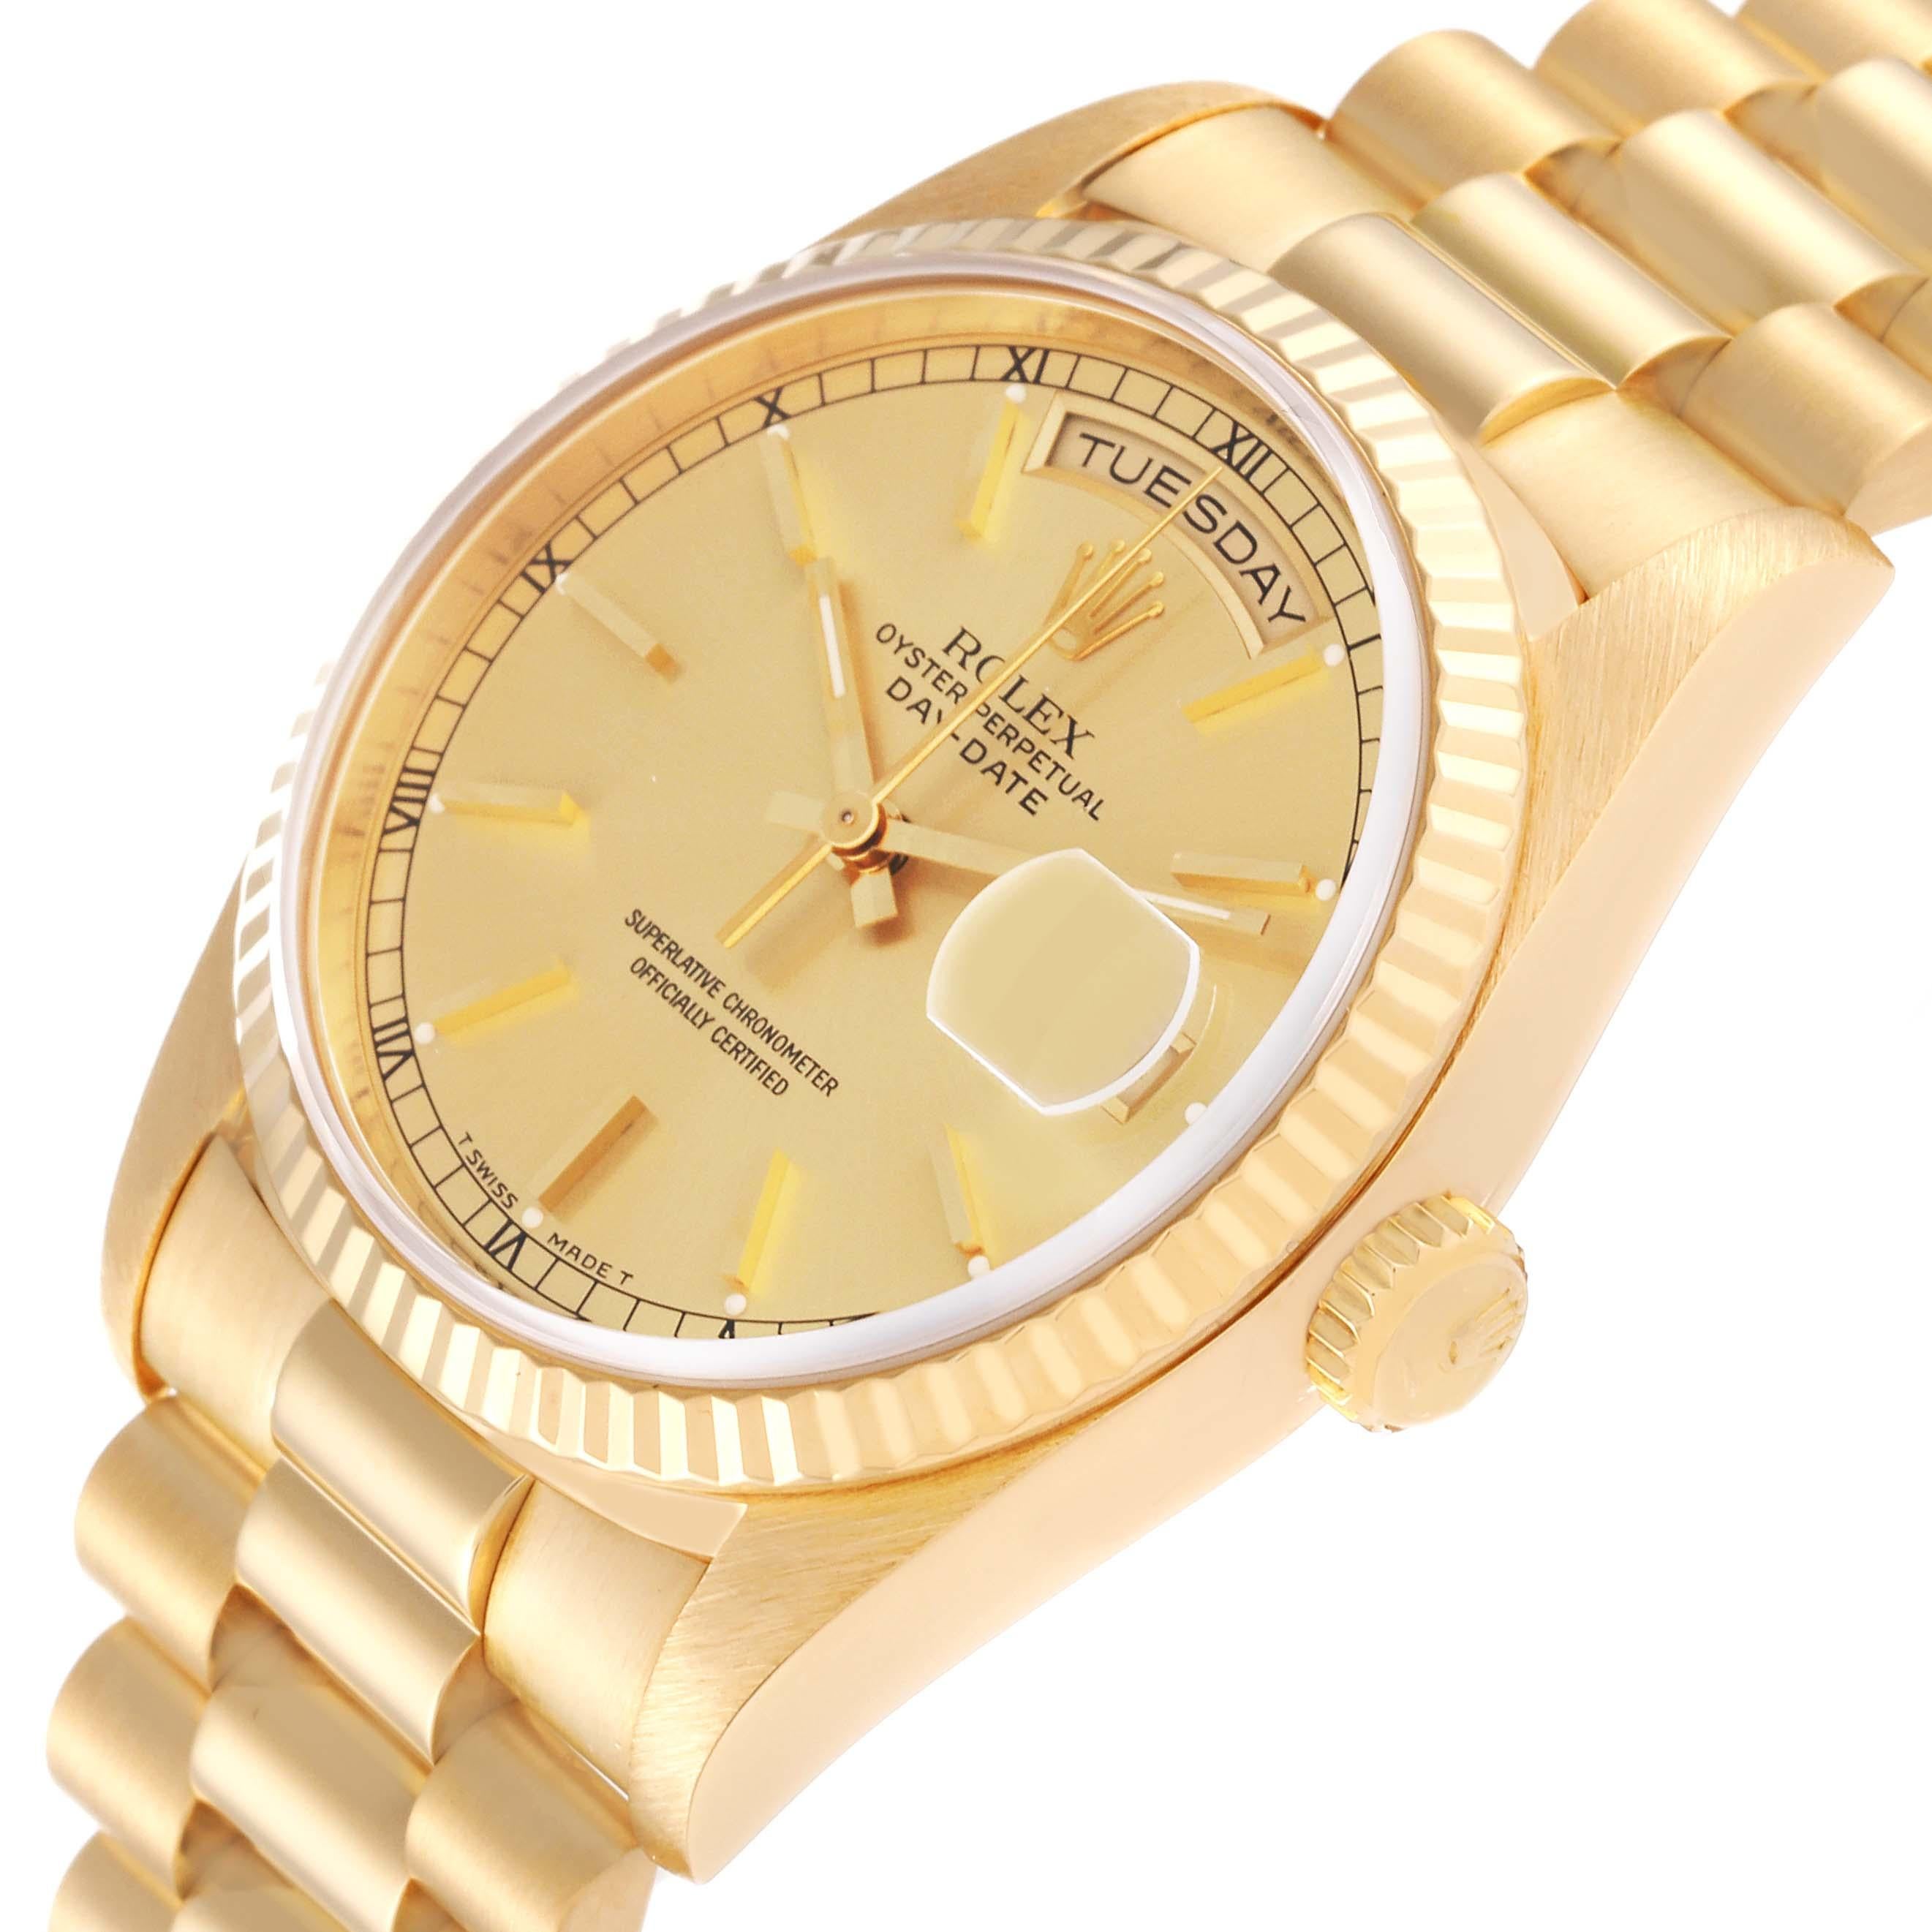 Rolex President Day-Date Yellow Gold Champagne Dial Mens Watch 18238. Officially certified chronometer automatic self-winding movement. 18k yellow gold oyster case 36.0 mm in diameter.  Rolex logo on the crown. 18K yellow gold fluted bezel. Scratch